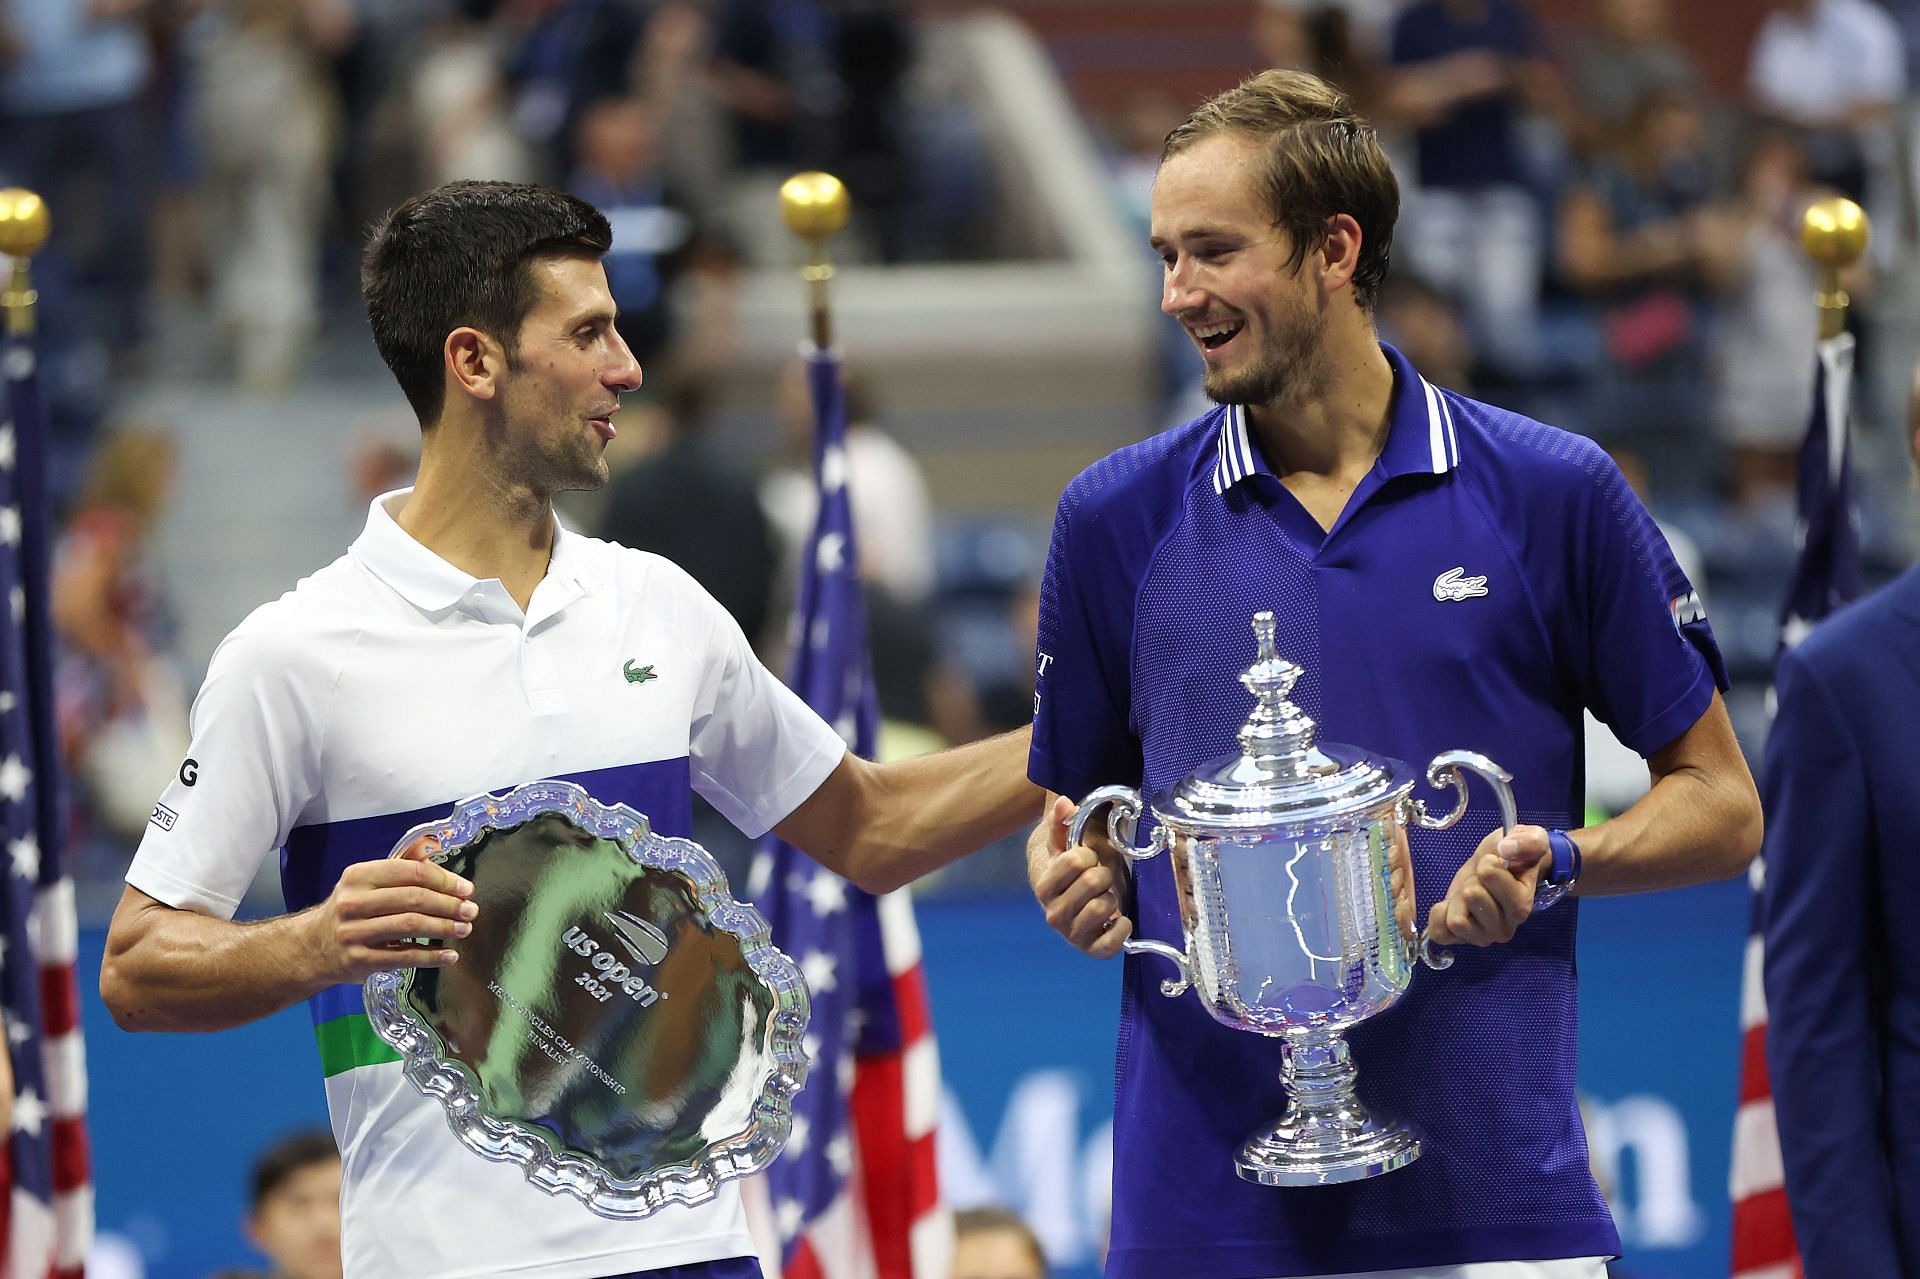 Novak Djokovic (left) loses his chance to avenge his 2021 US Open final loss to Daniil Medvedev (right)